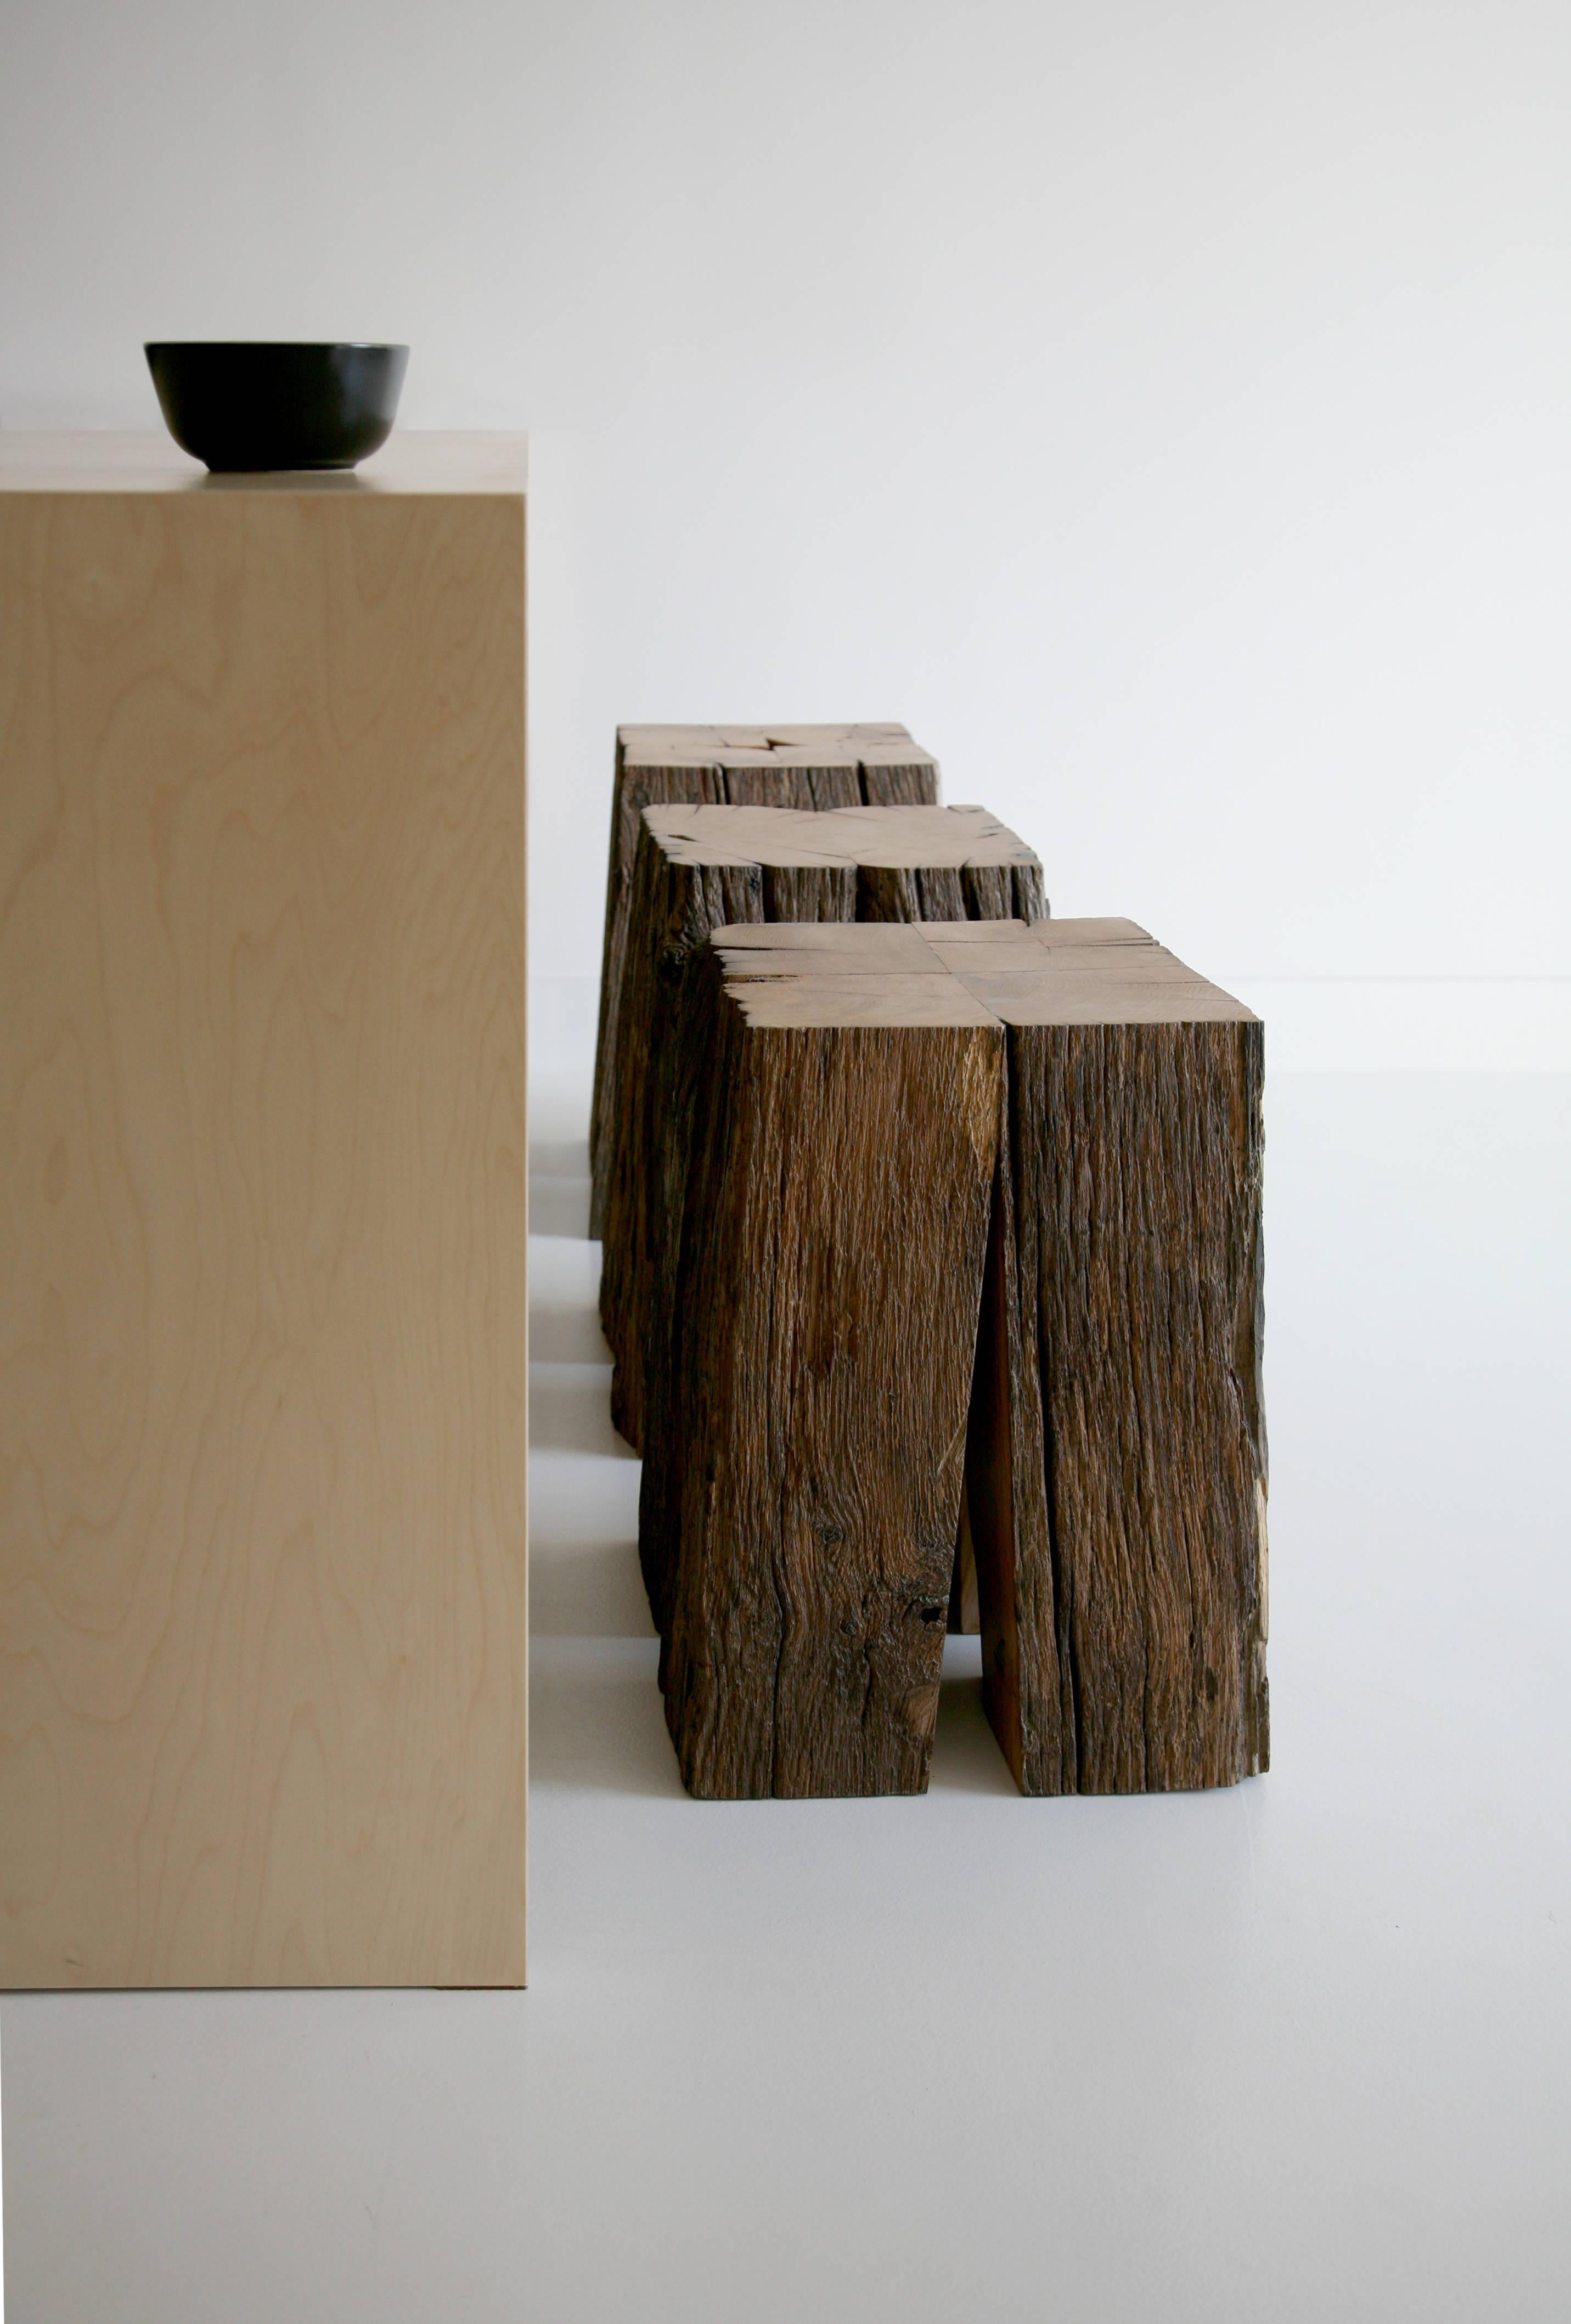 Ensemble of ancient Normandy oak new designed stool tables by Timothée Musset
Numbered limited edition piece, the singular story of ancient wood and the hand-sculpted work creates particular finitions, making each piece unique.
Collaboration with